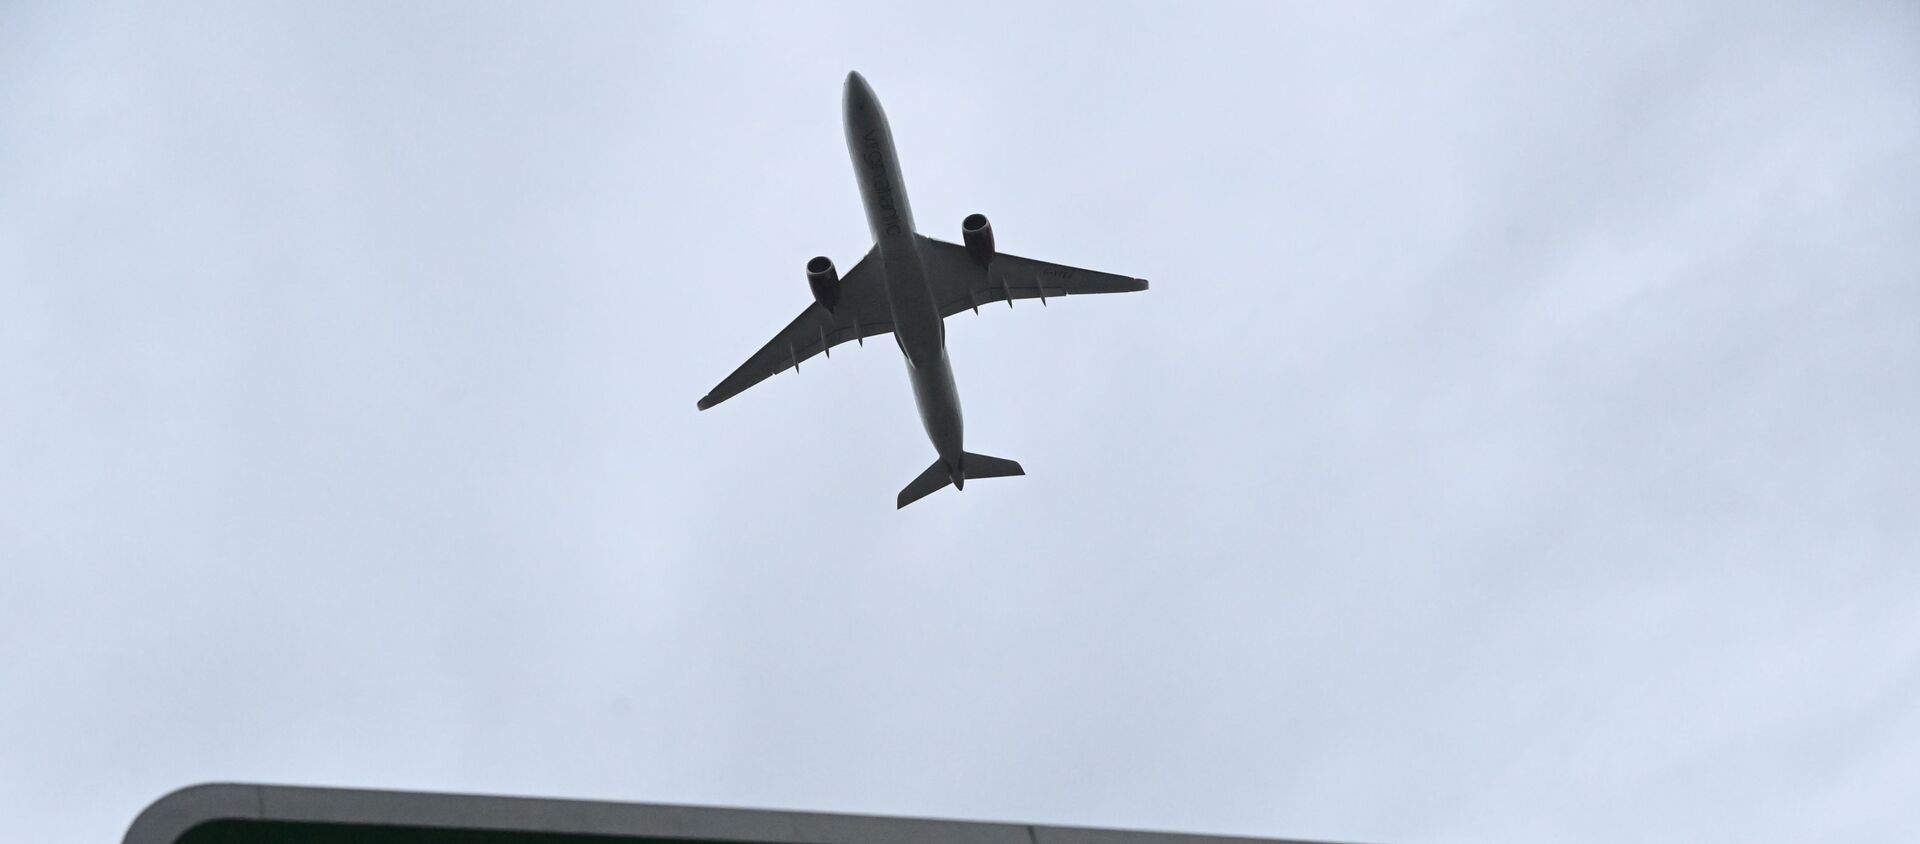 An aircraft takes off at Heathrow Airport amid the spread of the coronavirus disease (COVID-19) pandemic in London, Britain, 4 February 2021.  - Sputnik International, 1920, 22.04.2021